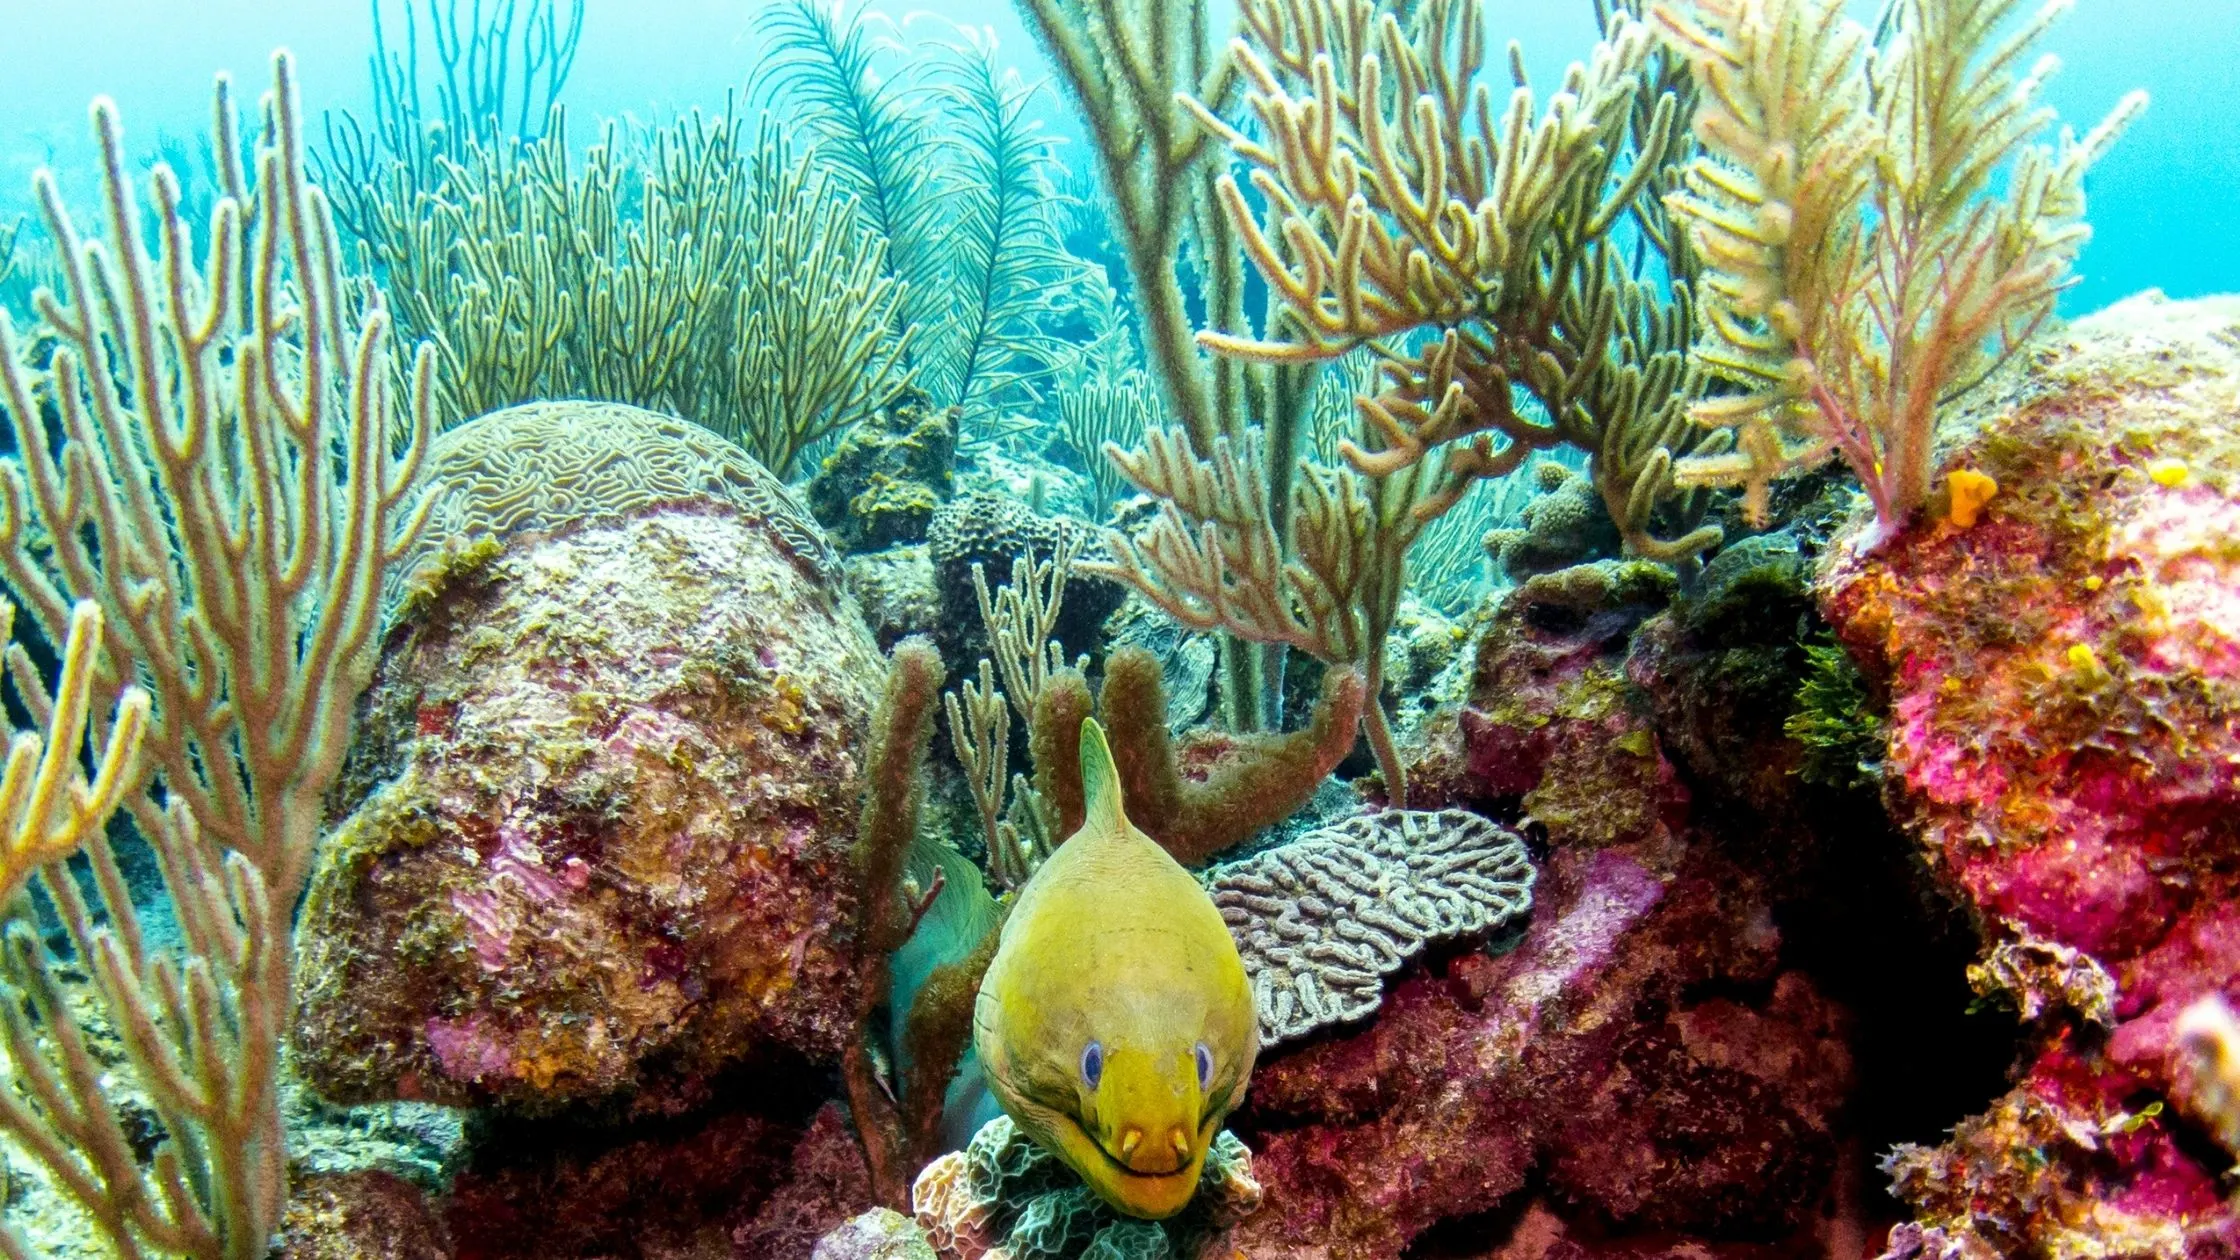 A picture of a fish swimming in coral in the Belize Barrier reef.